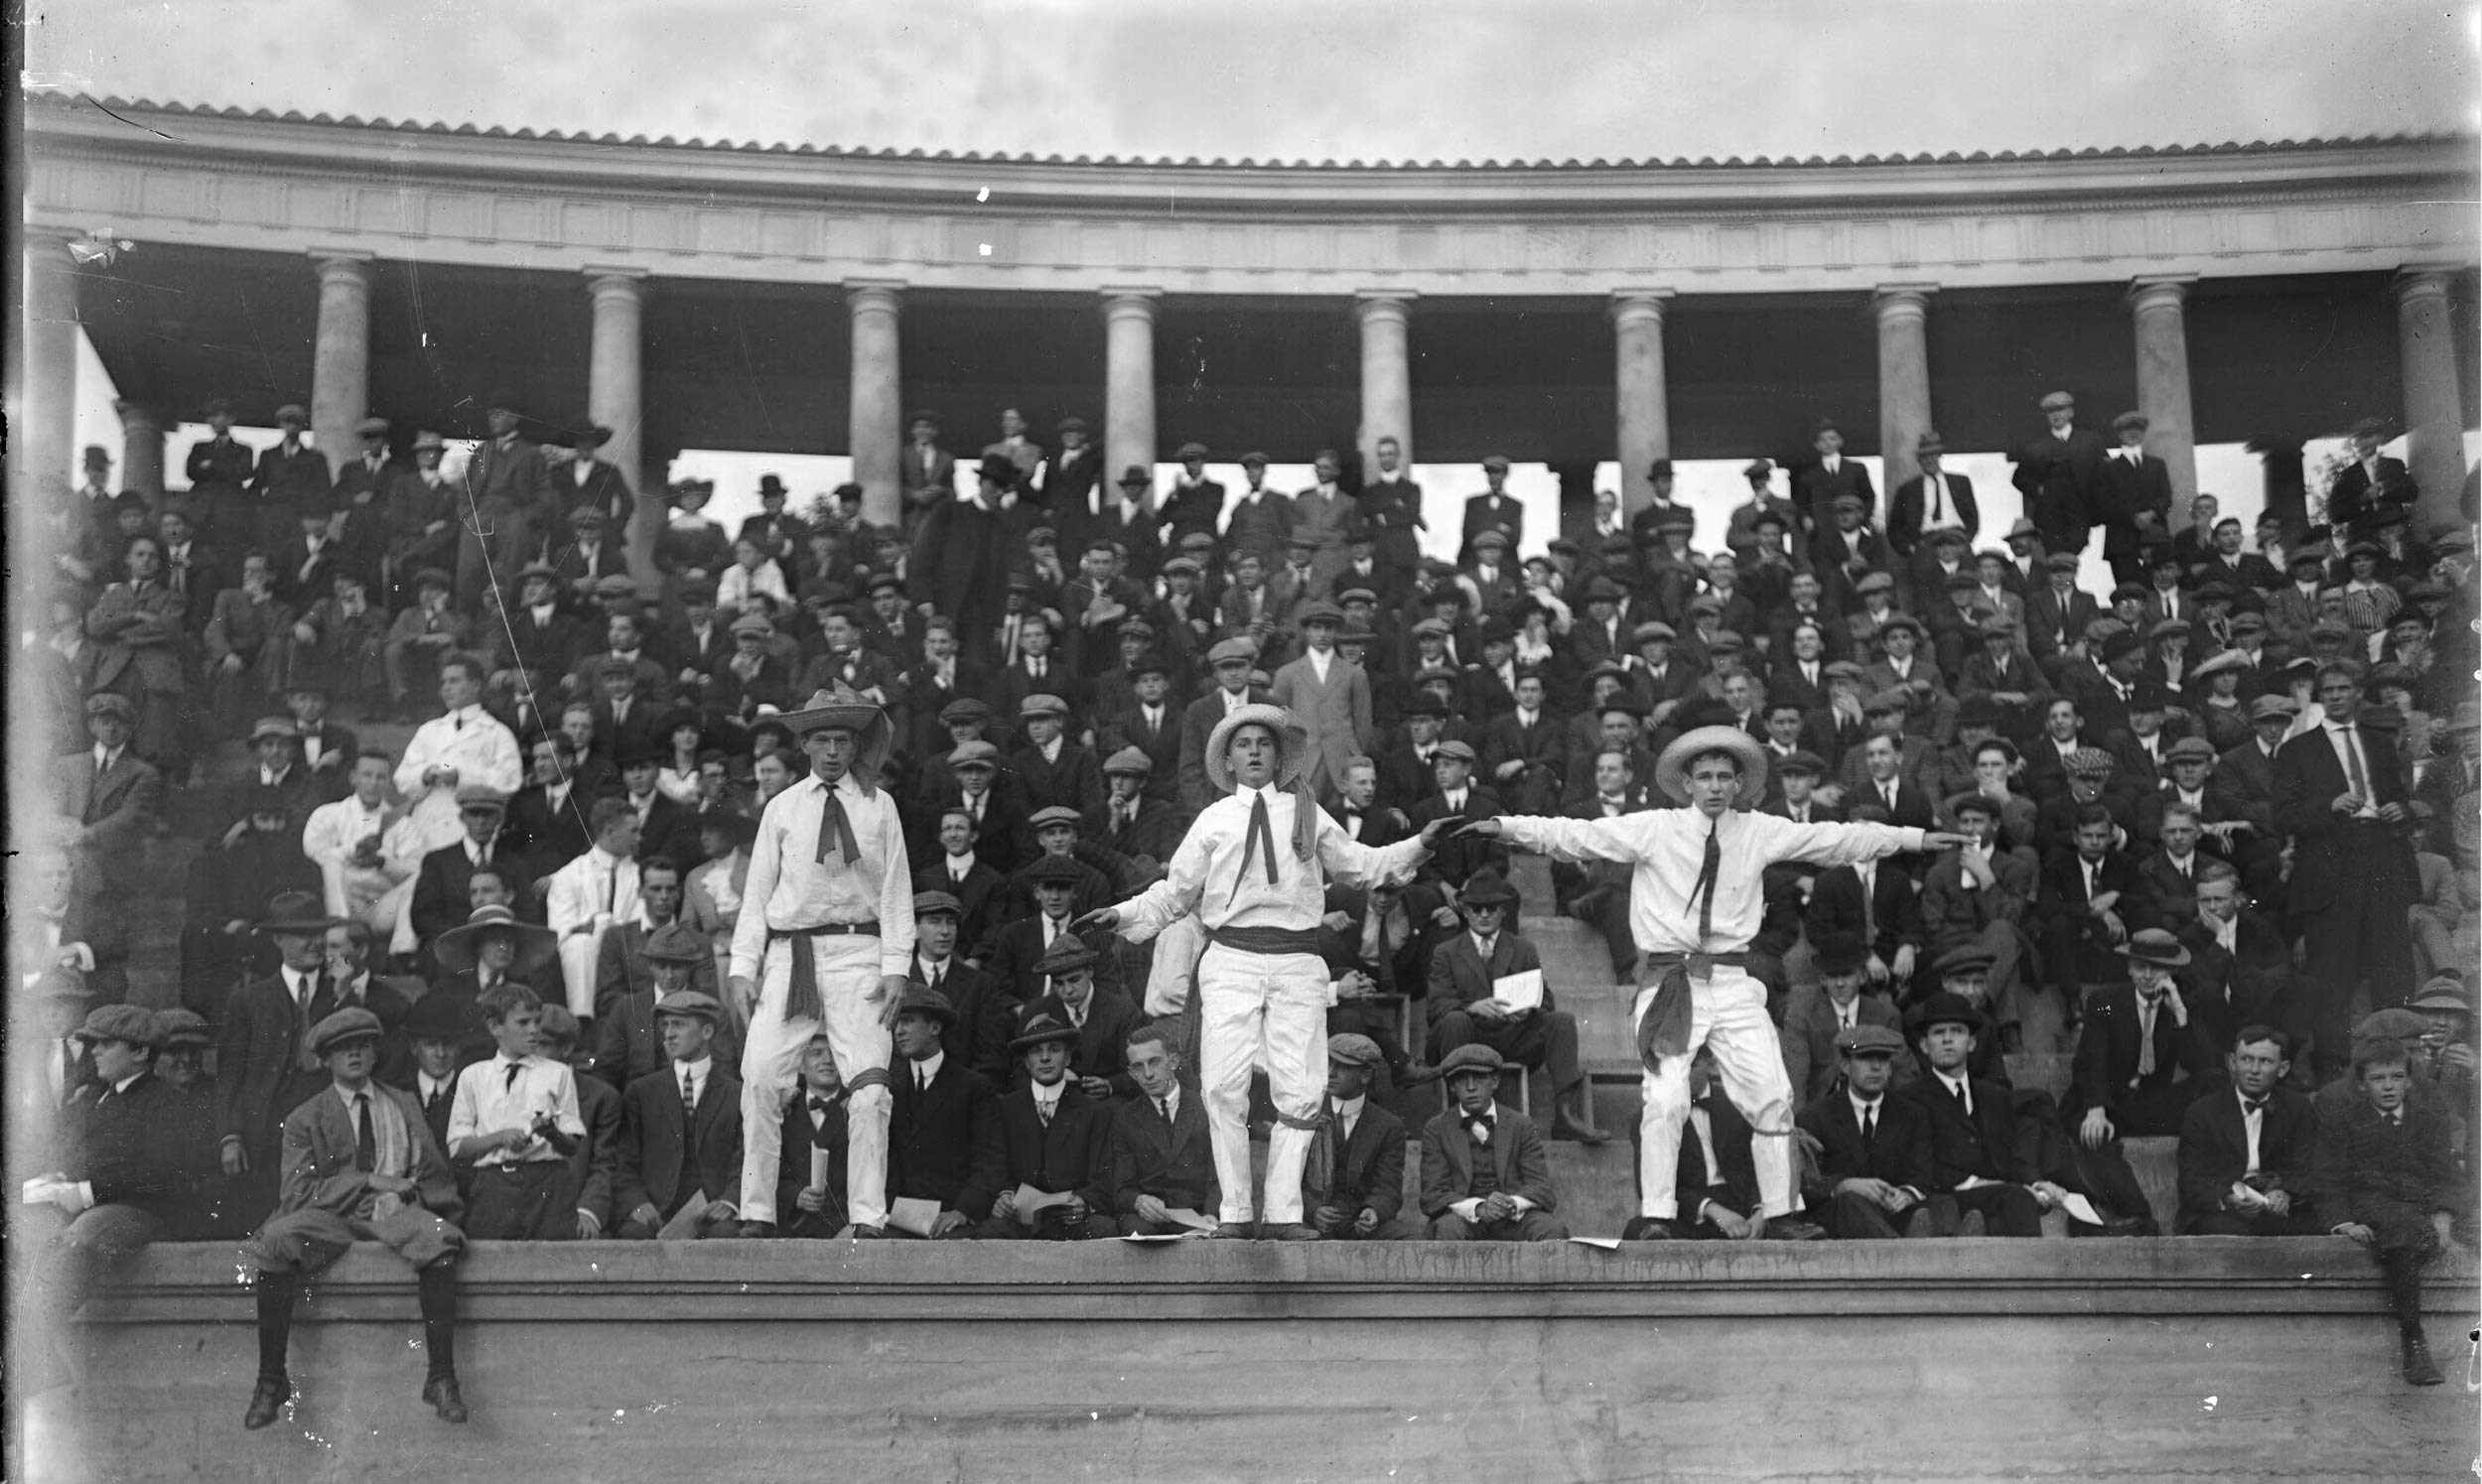 Holsinger image of a crowd at UVA